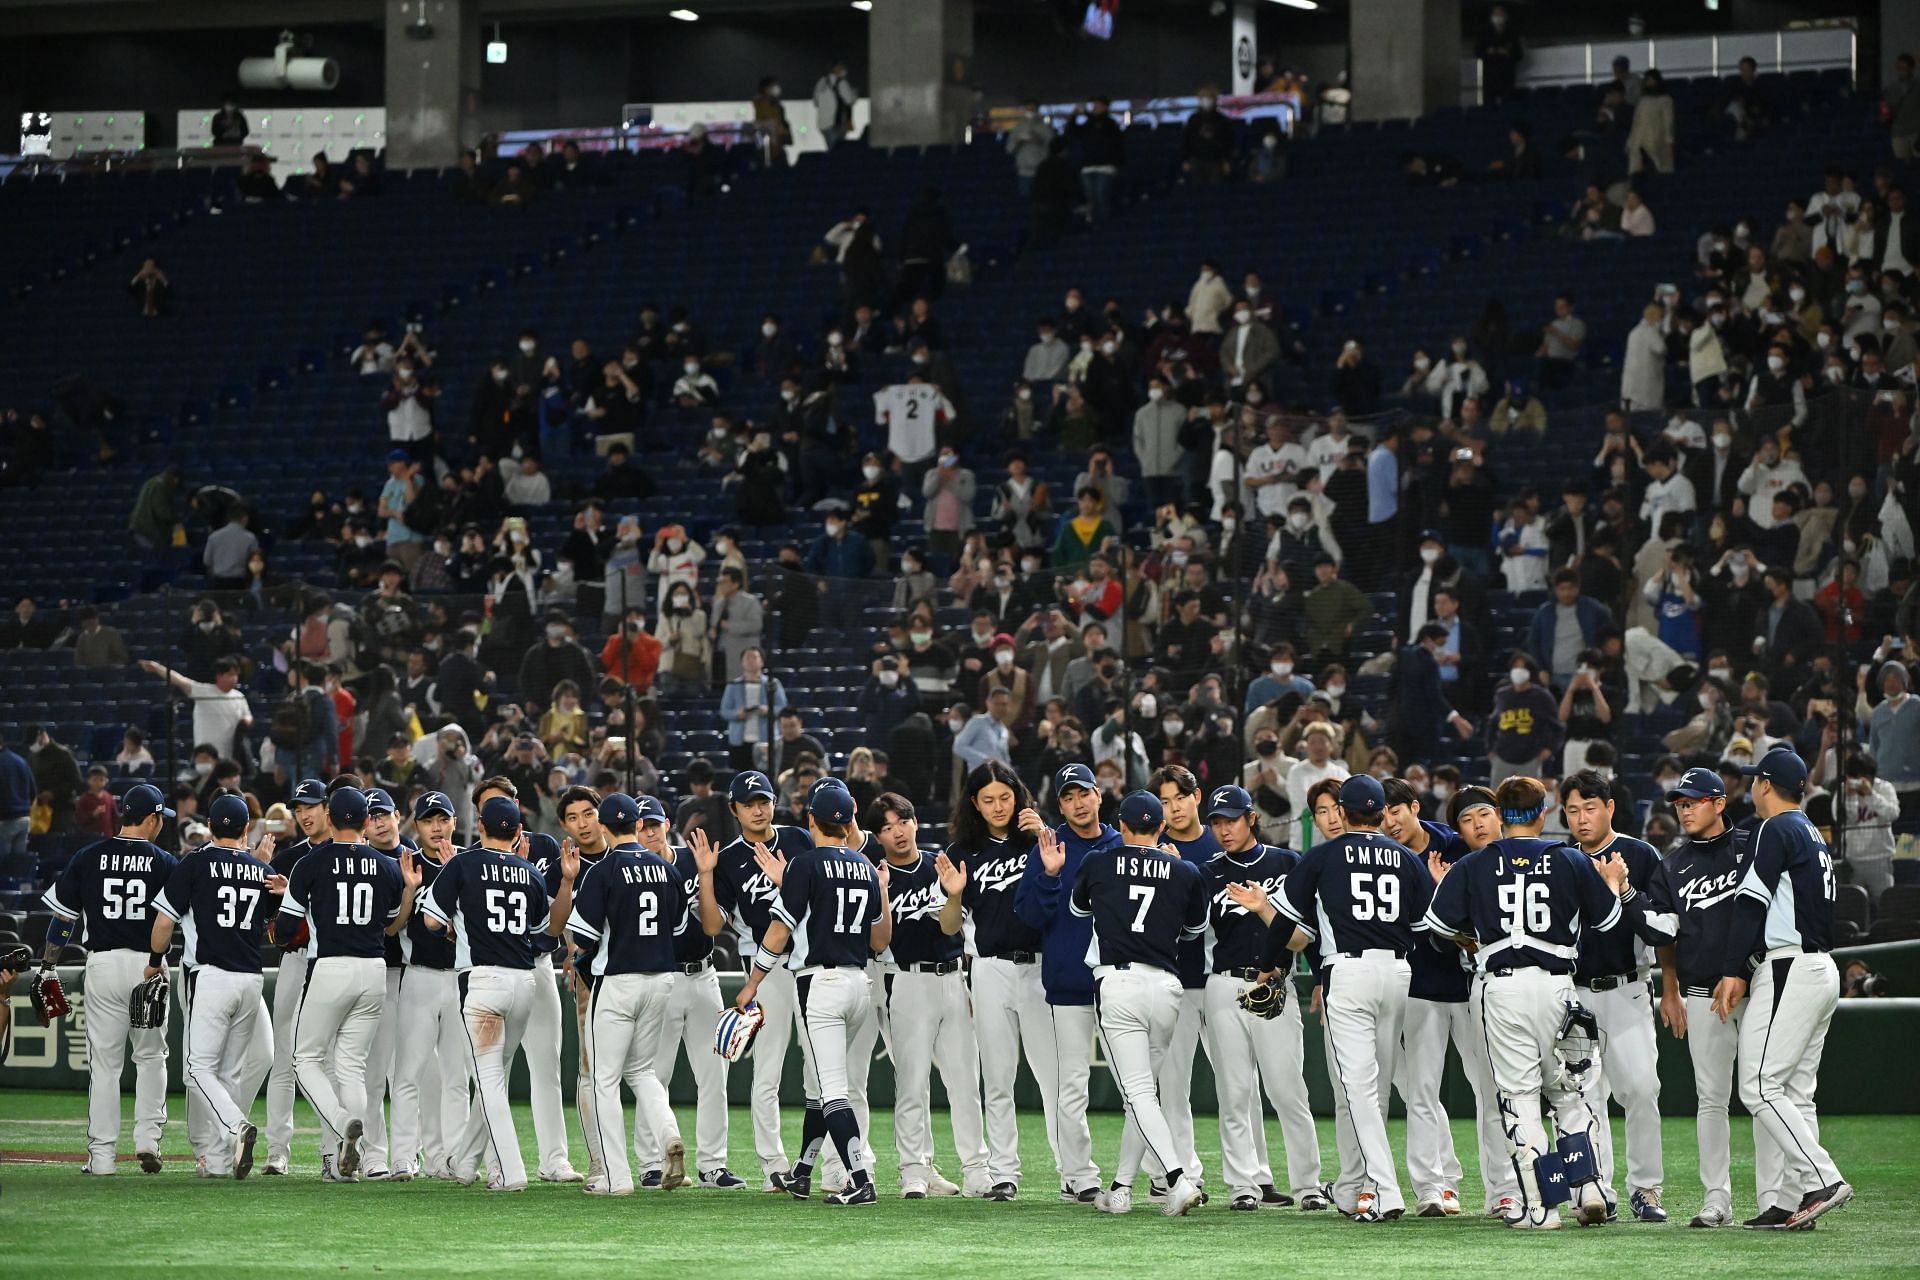 Korea players celebrate the team&#039;s victory in the World Baseball Classic Pool B game between Korea and China at Tokyo Dome on March 13, 2023